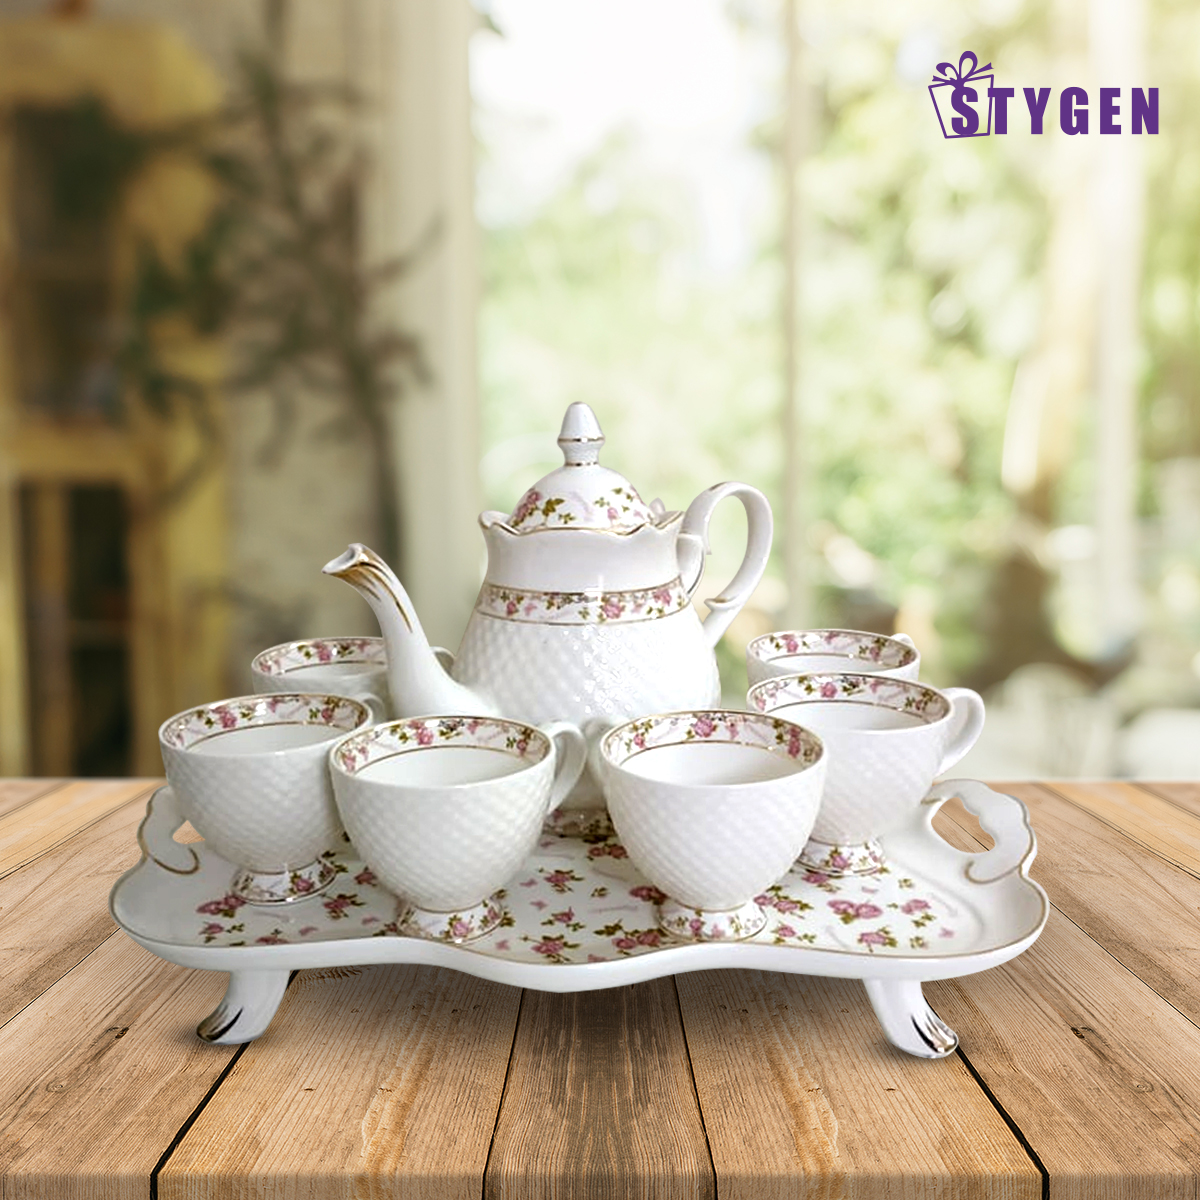 European Style Ceramic Tea Cup And Tray Set Flower Print